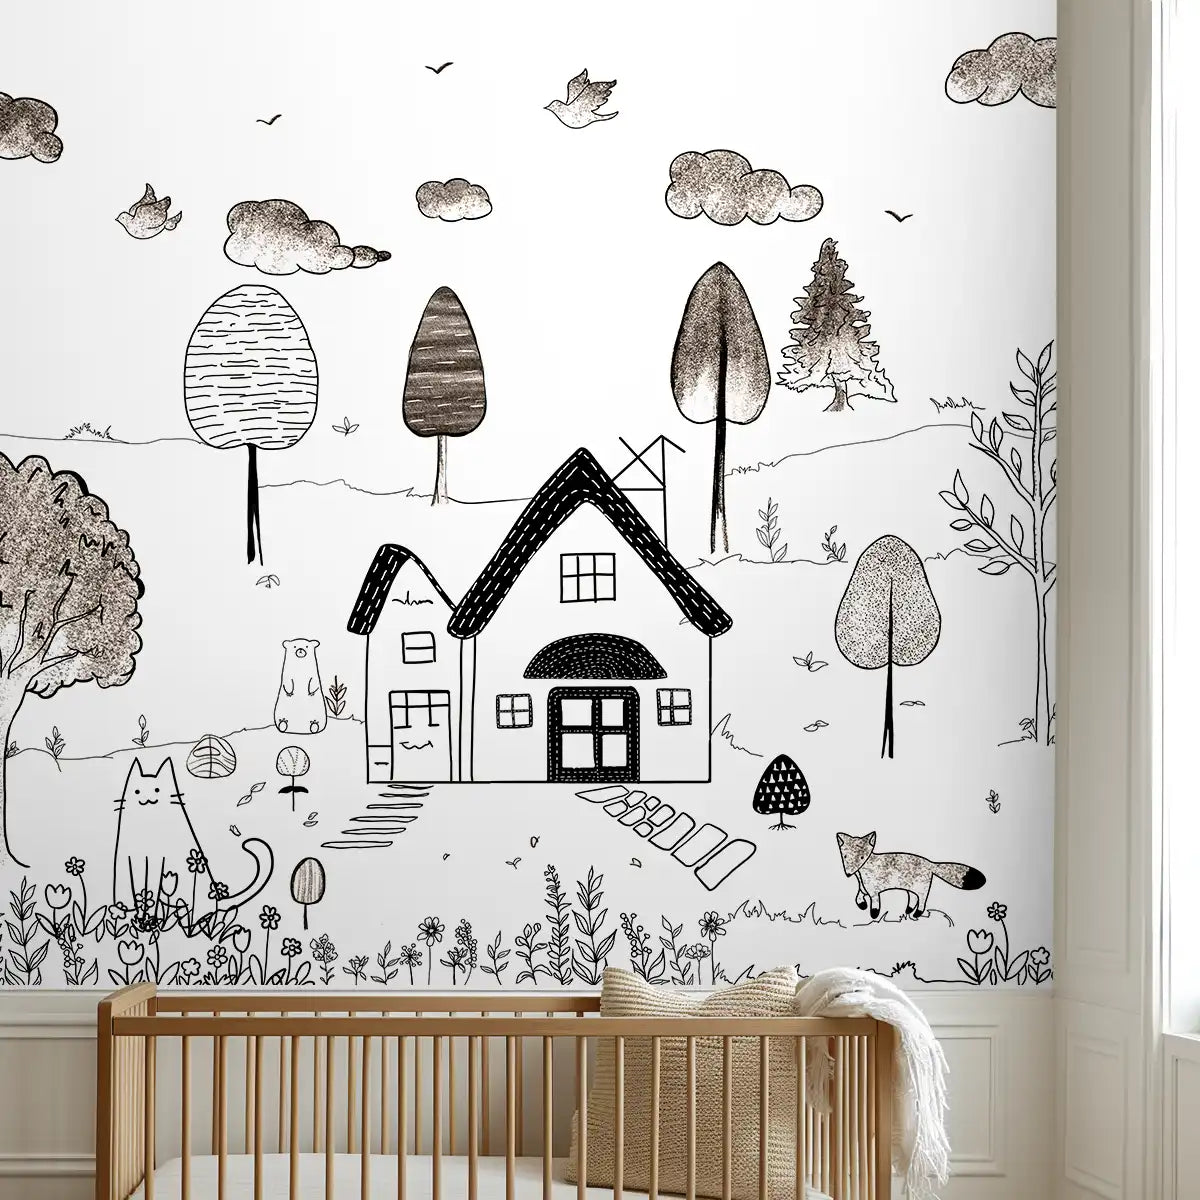 Cute Kids Room Pencil Sketch Theme Wallpaper by lifencolors